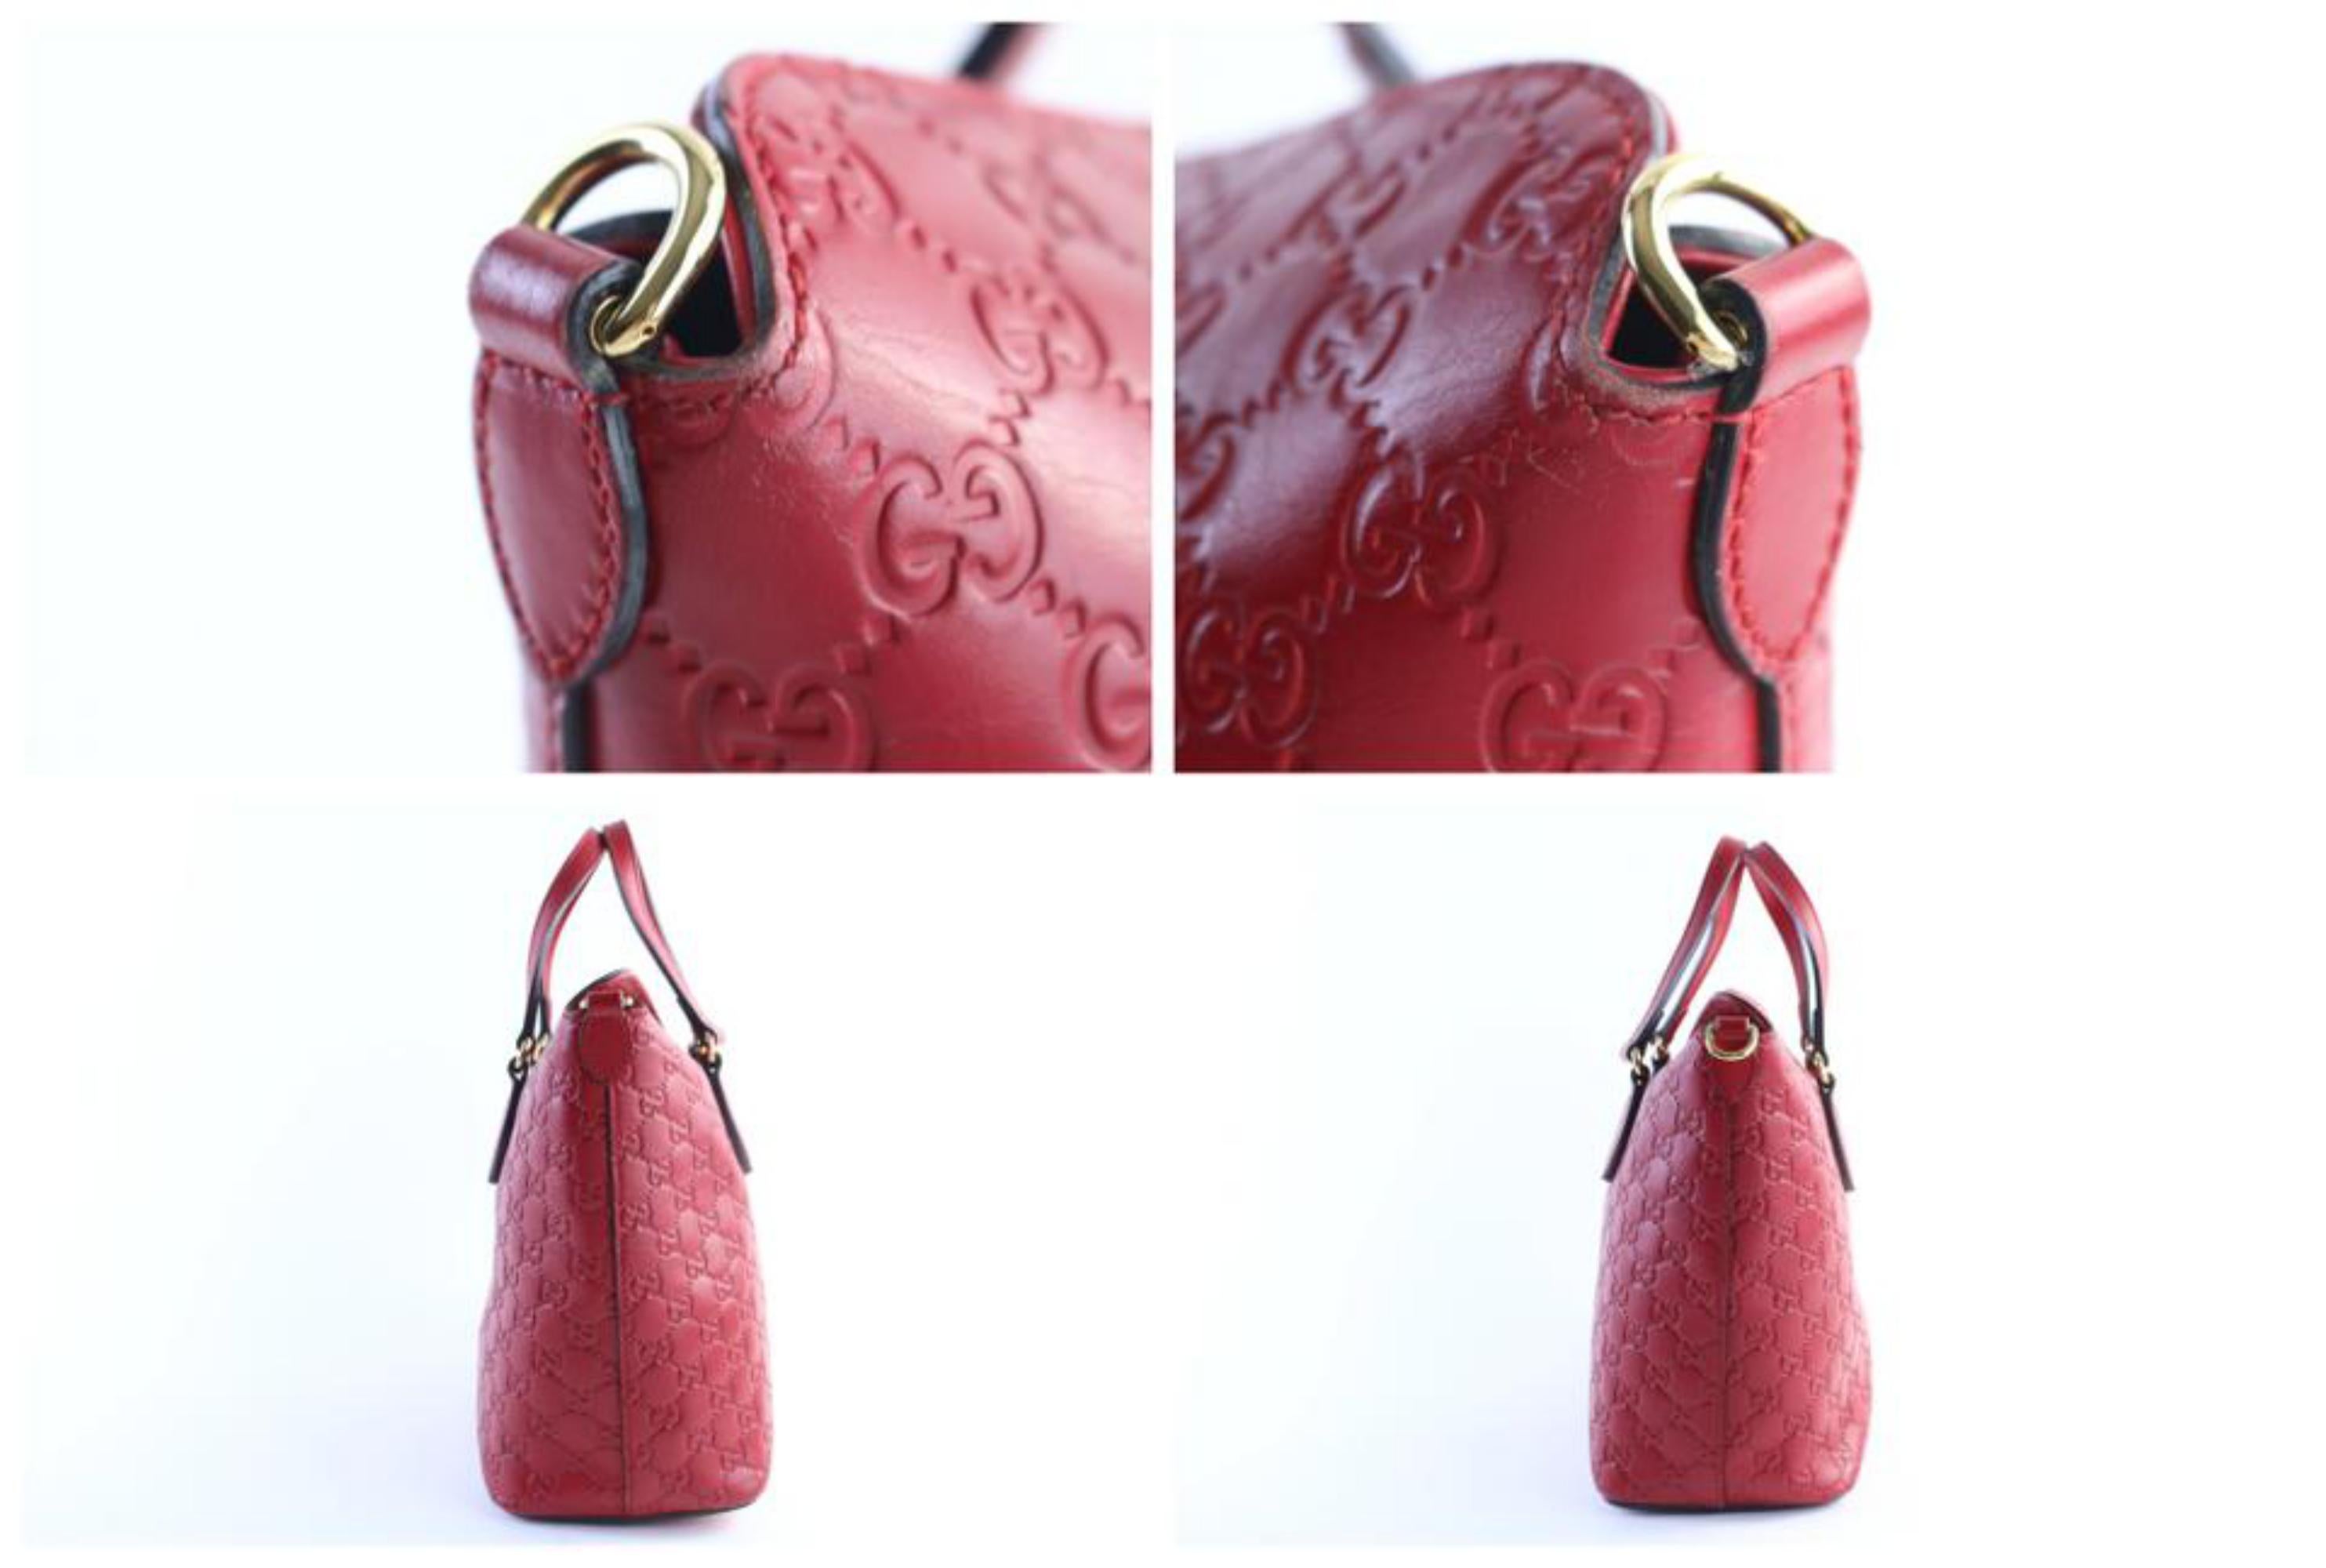 Women's Gucci Top Handle Tote 11gr0606 Red Guccissima Leather Shoulder Bag For Sale